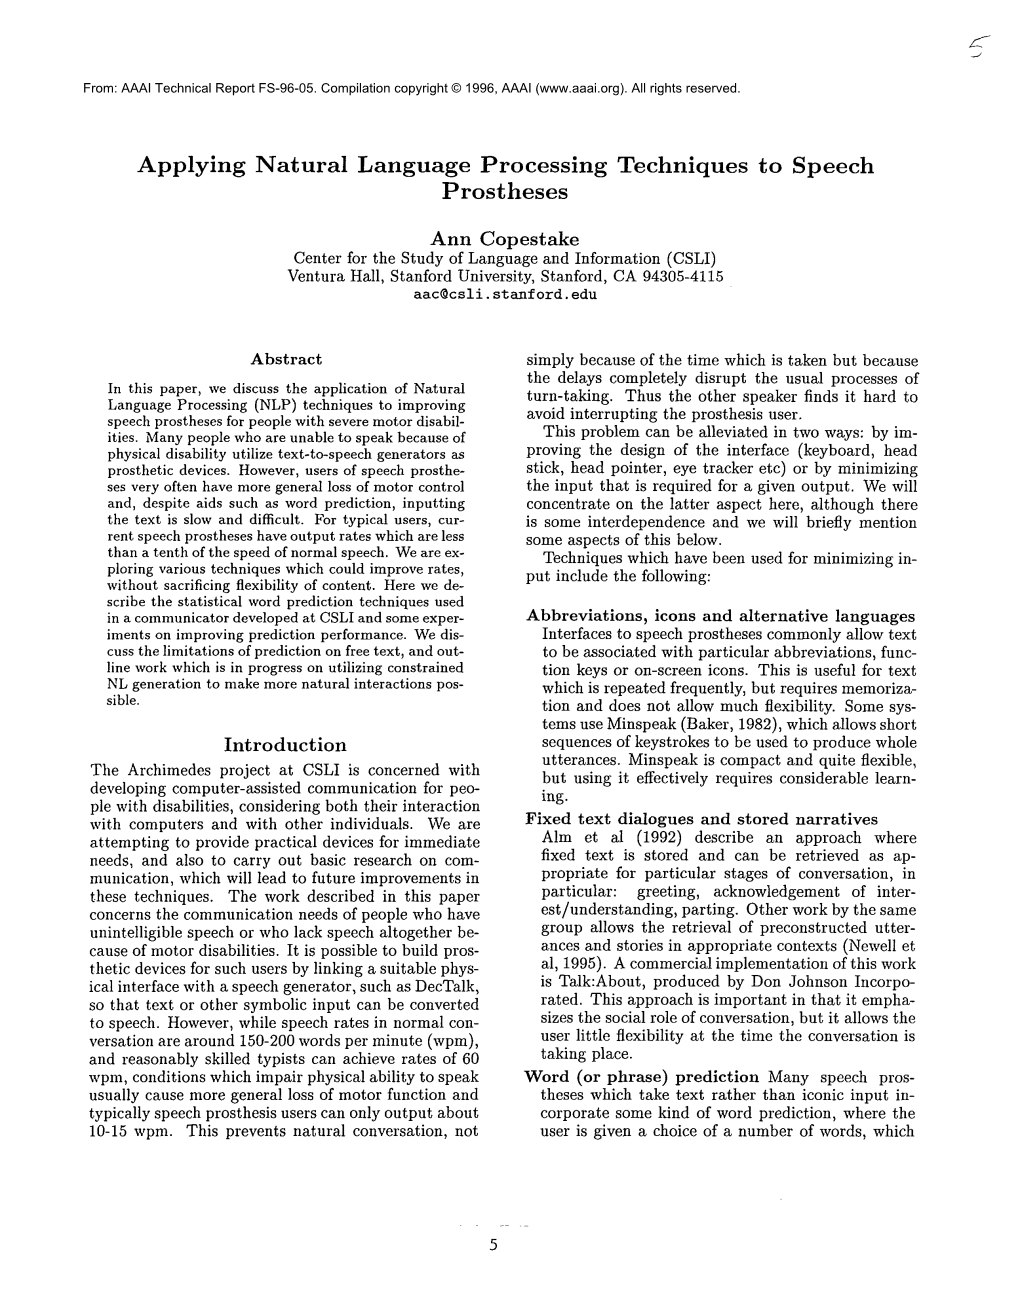 Applying Natural Language Processing Techniques to Speech Prostheses